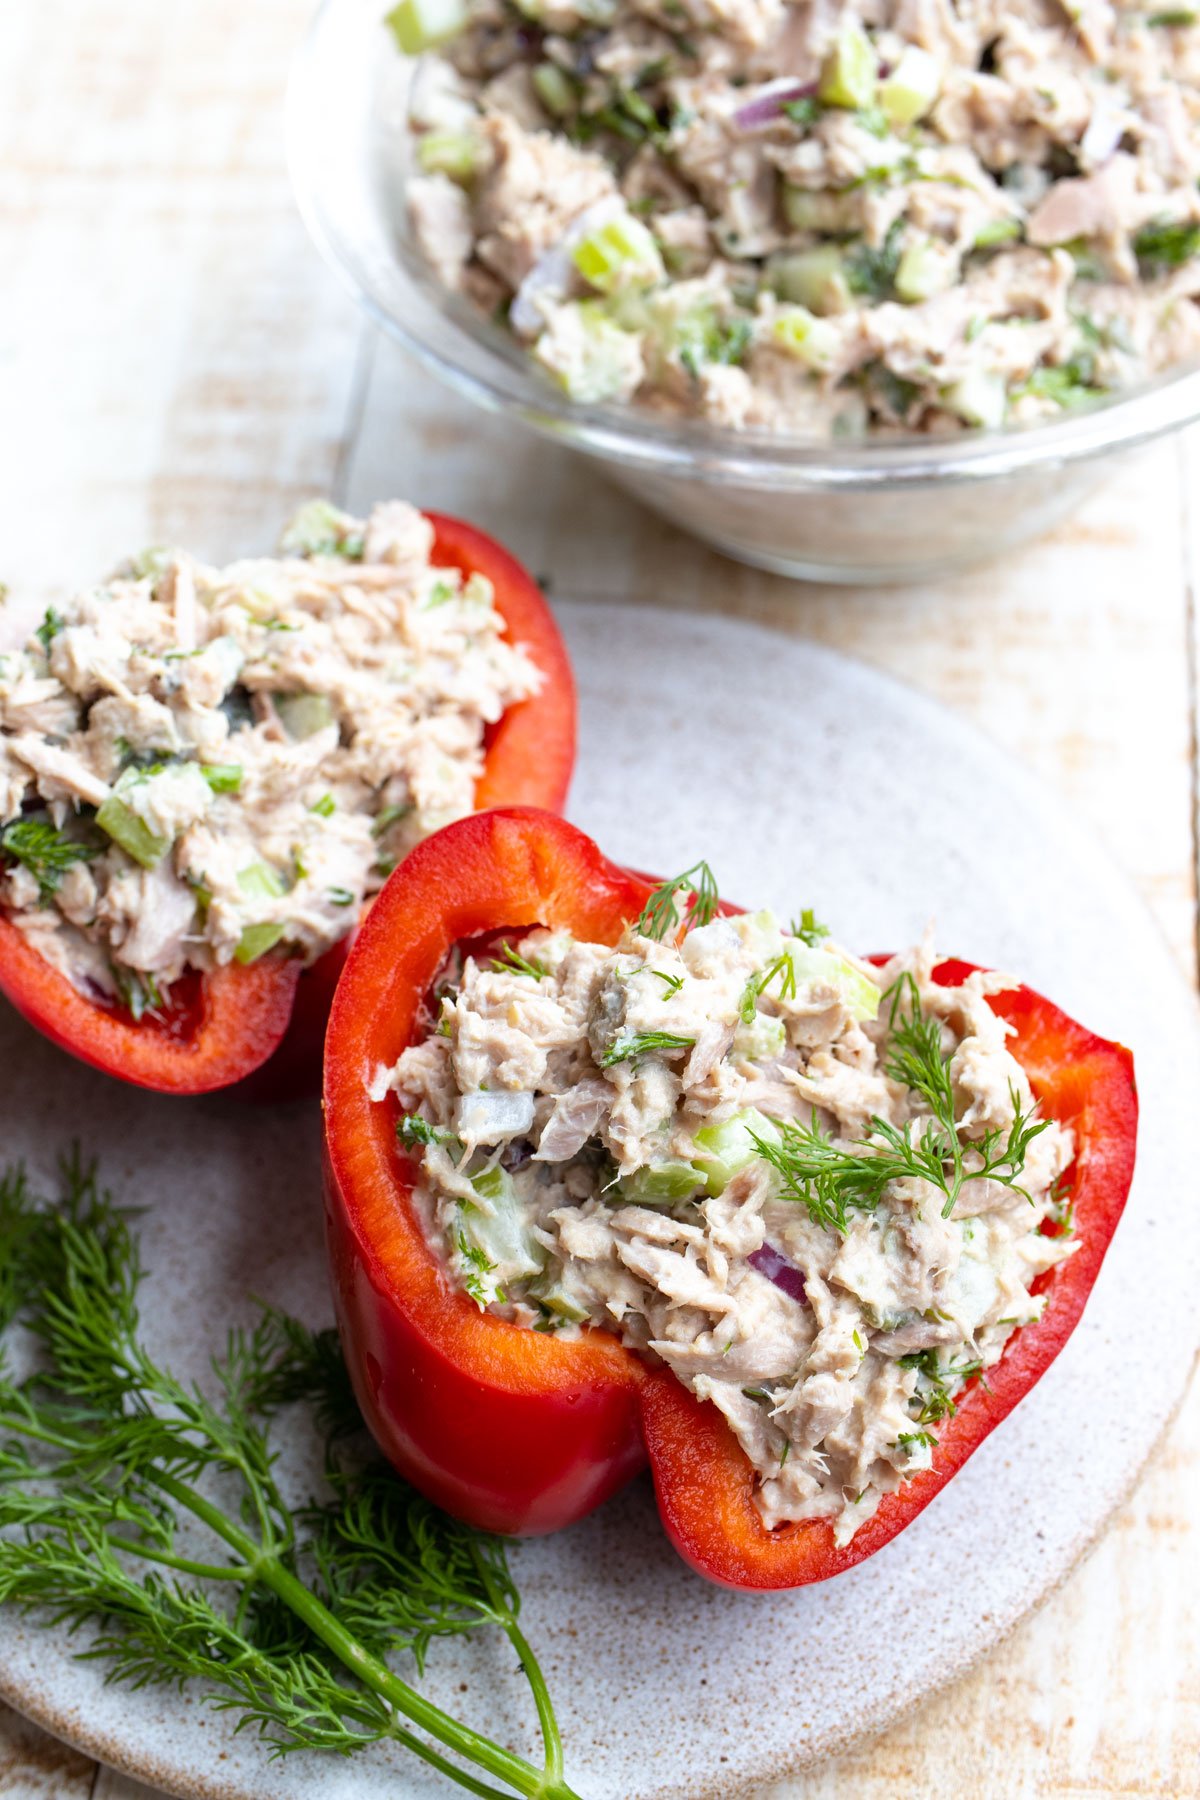 Halved bell peppers filled with tuna salad on a plate.